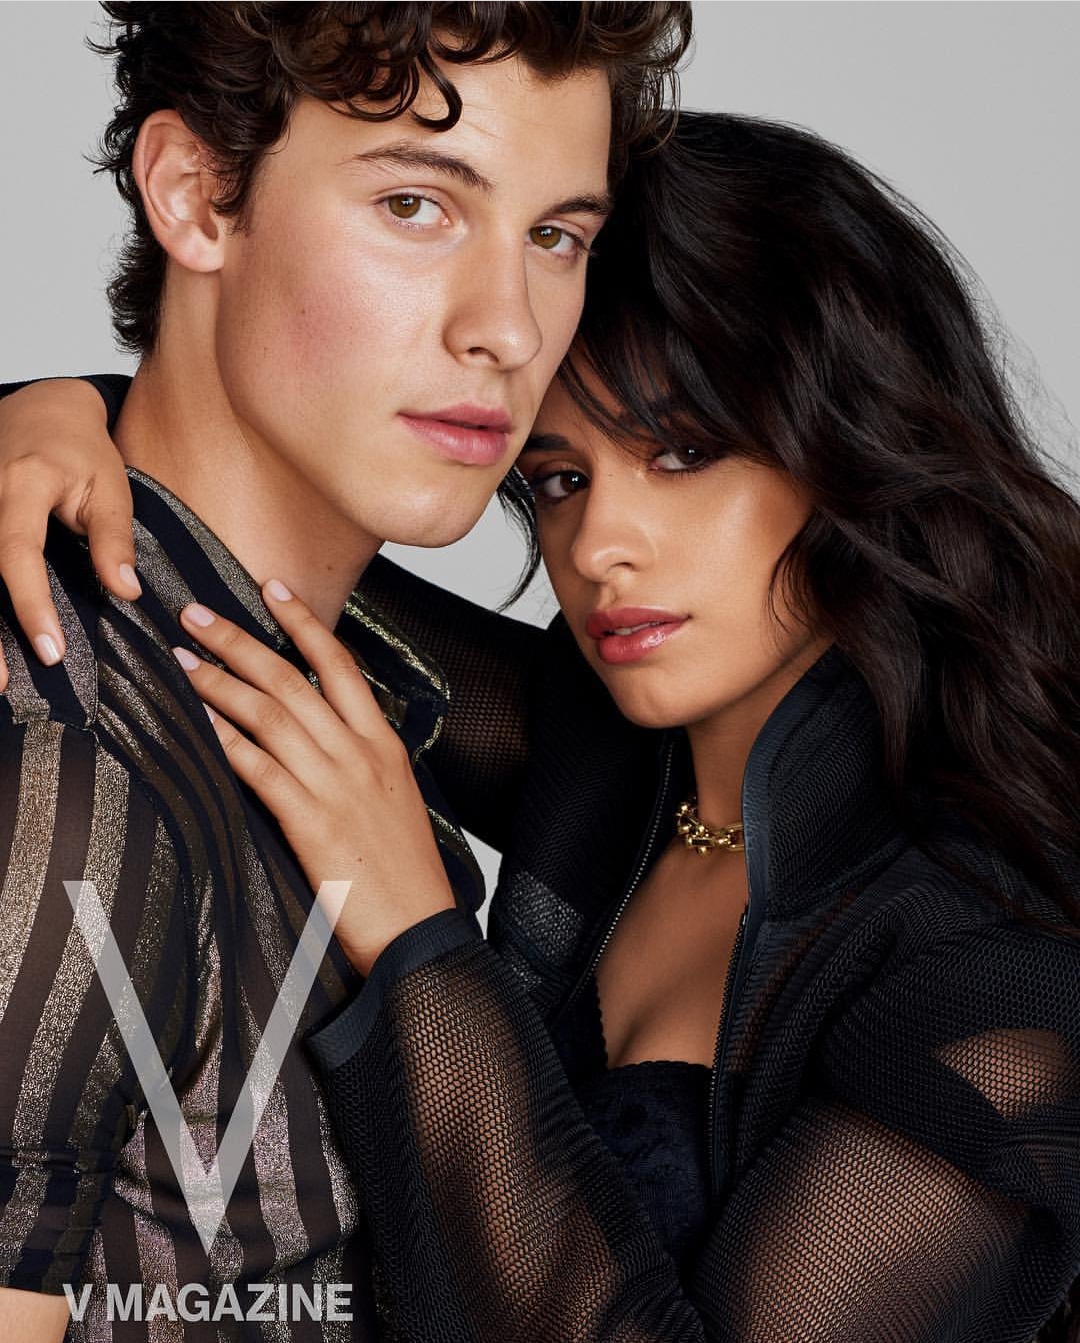 Shawn Mendes and Camila Cabello in relationship